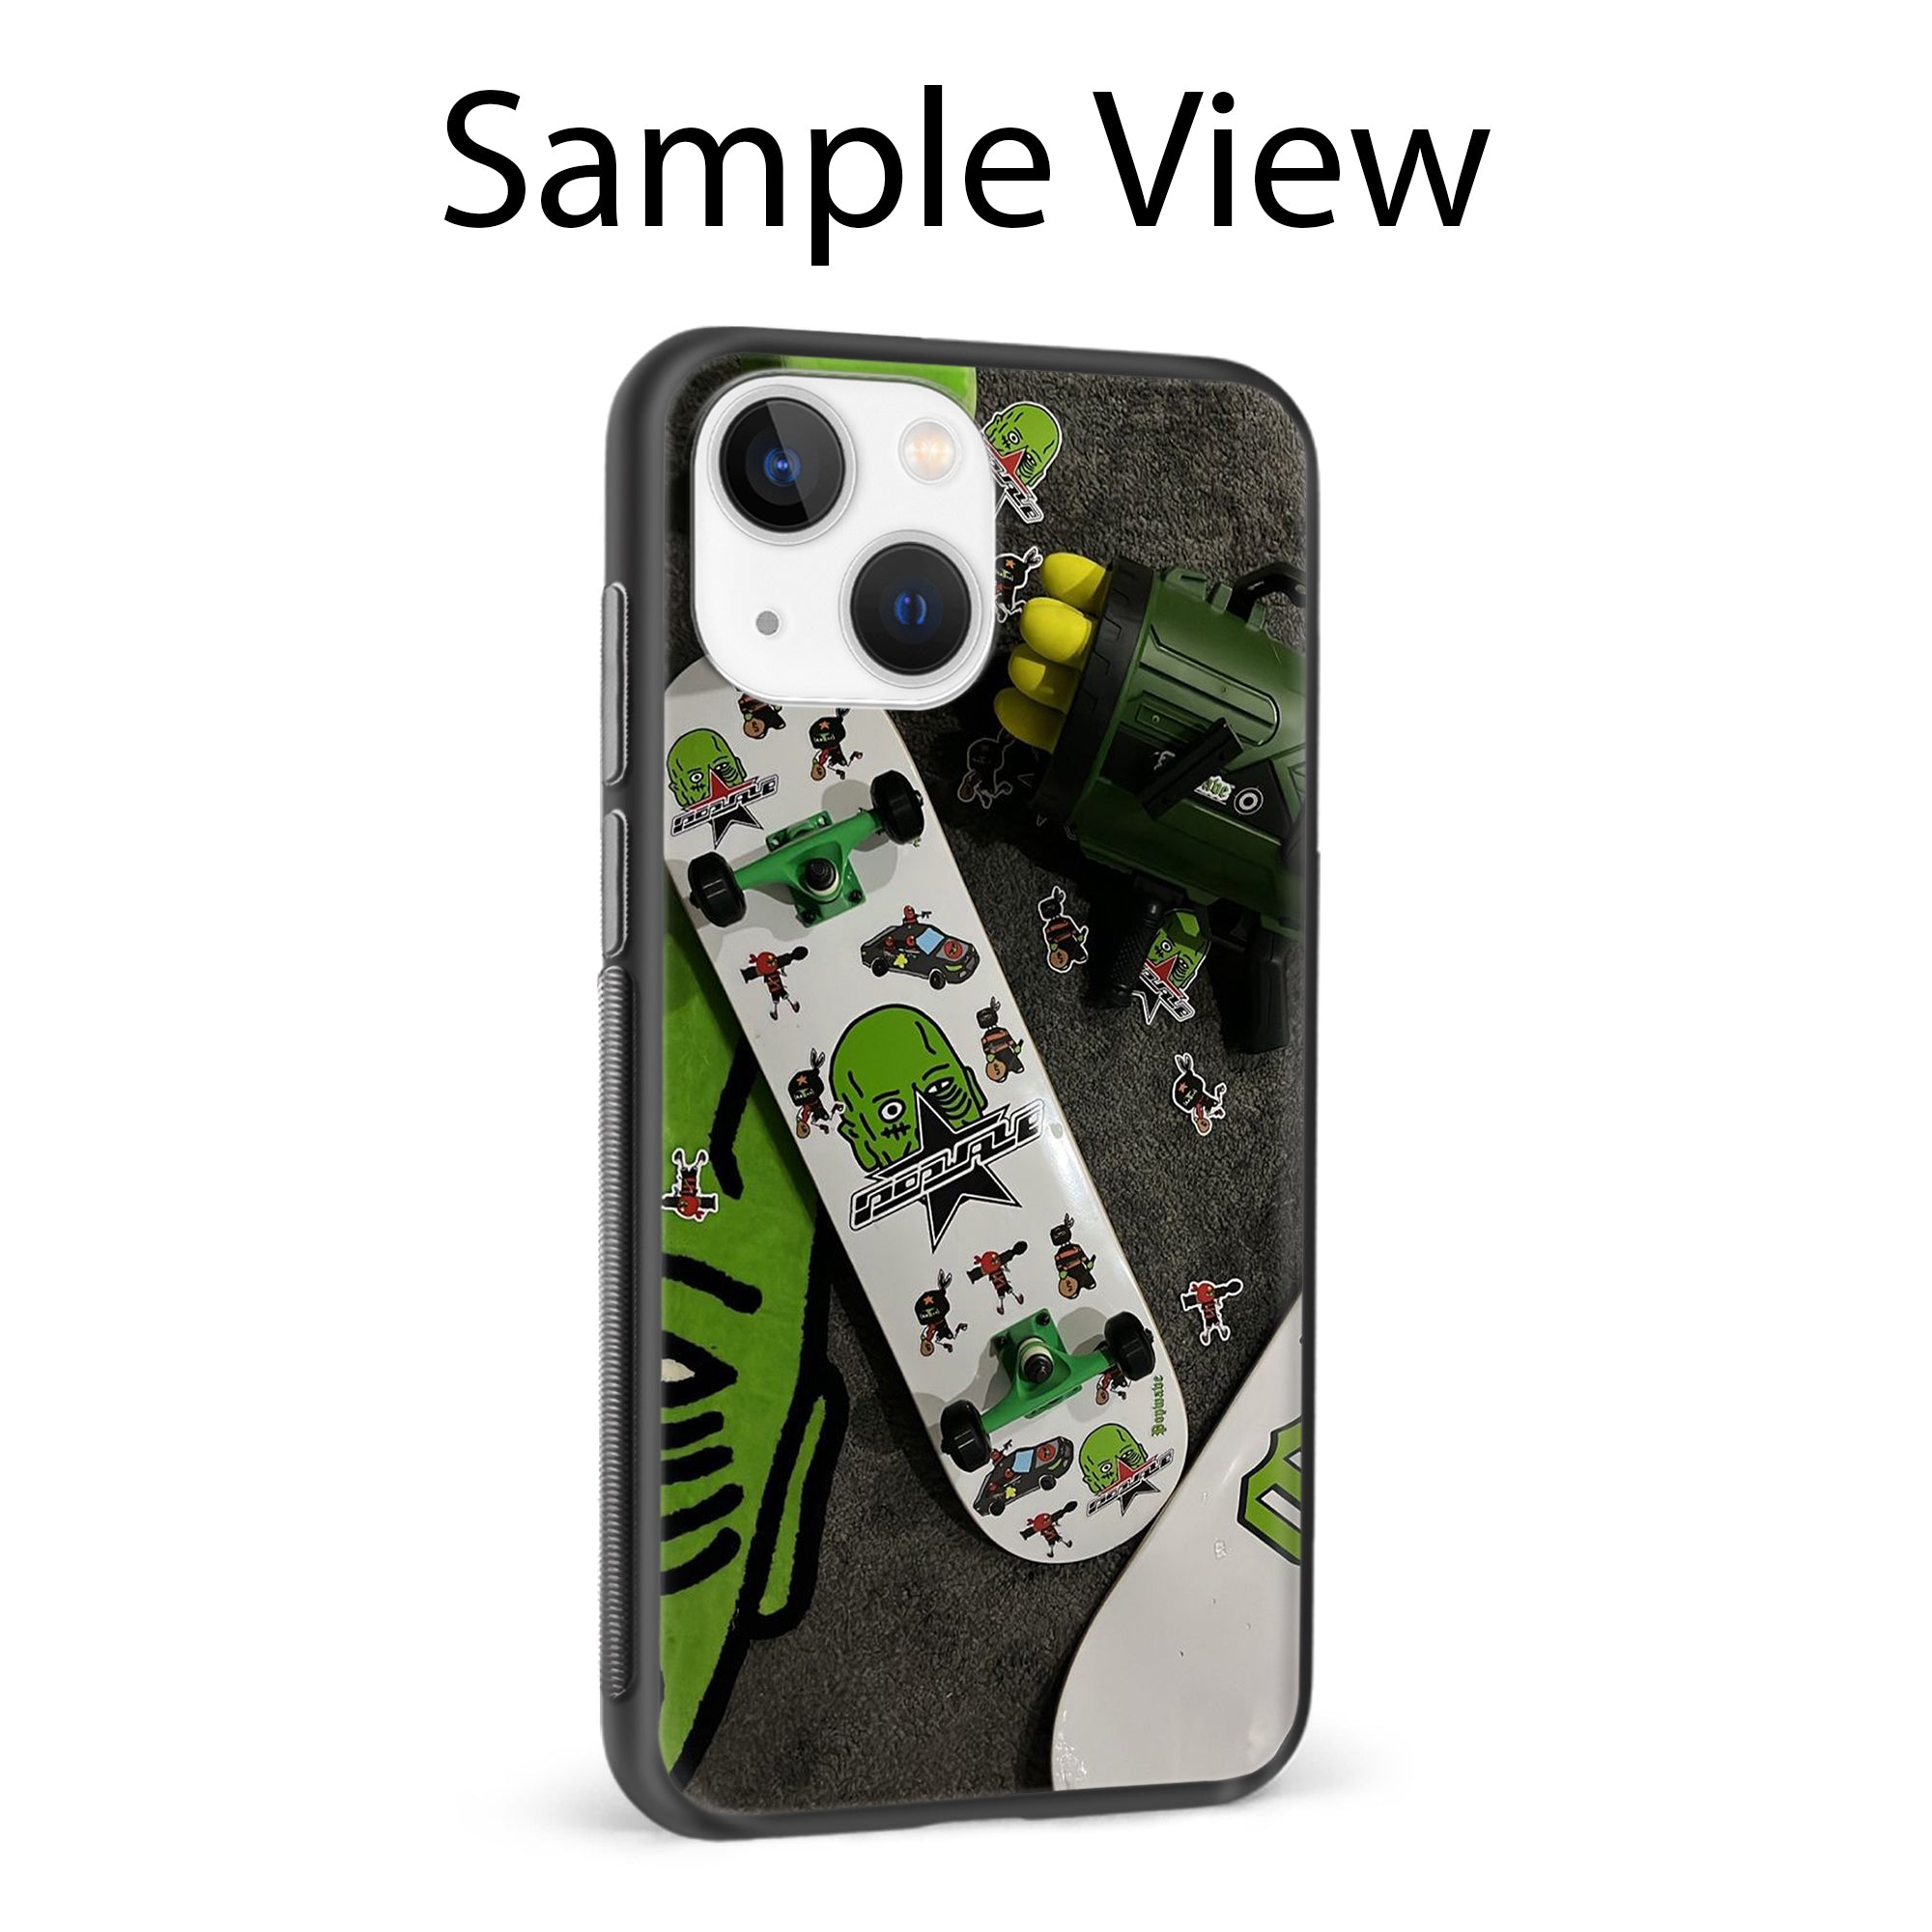 Buy Hulk Skateboard Metal-Silicon Back Mobile Phone Case/Cover For Samsung Galaxy A50 / A50s / A30s Online